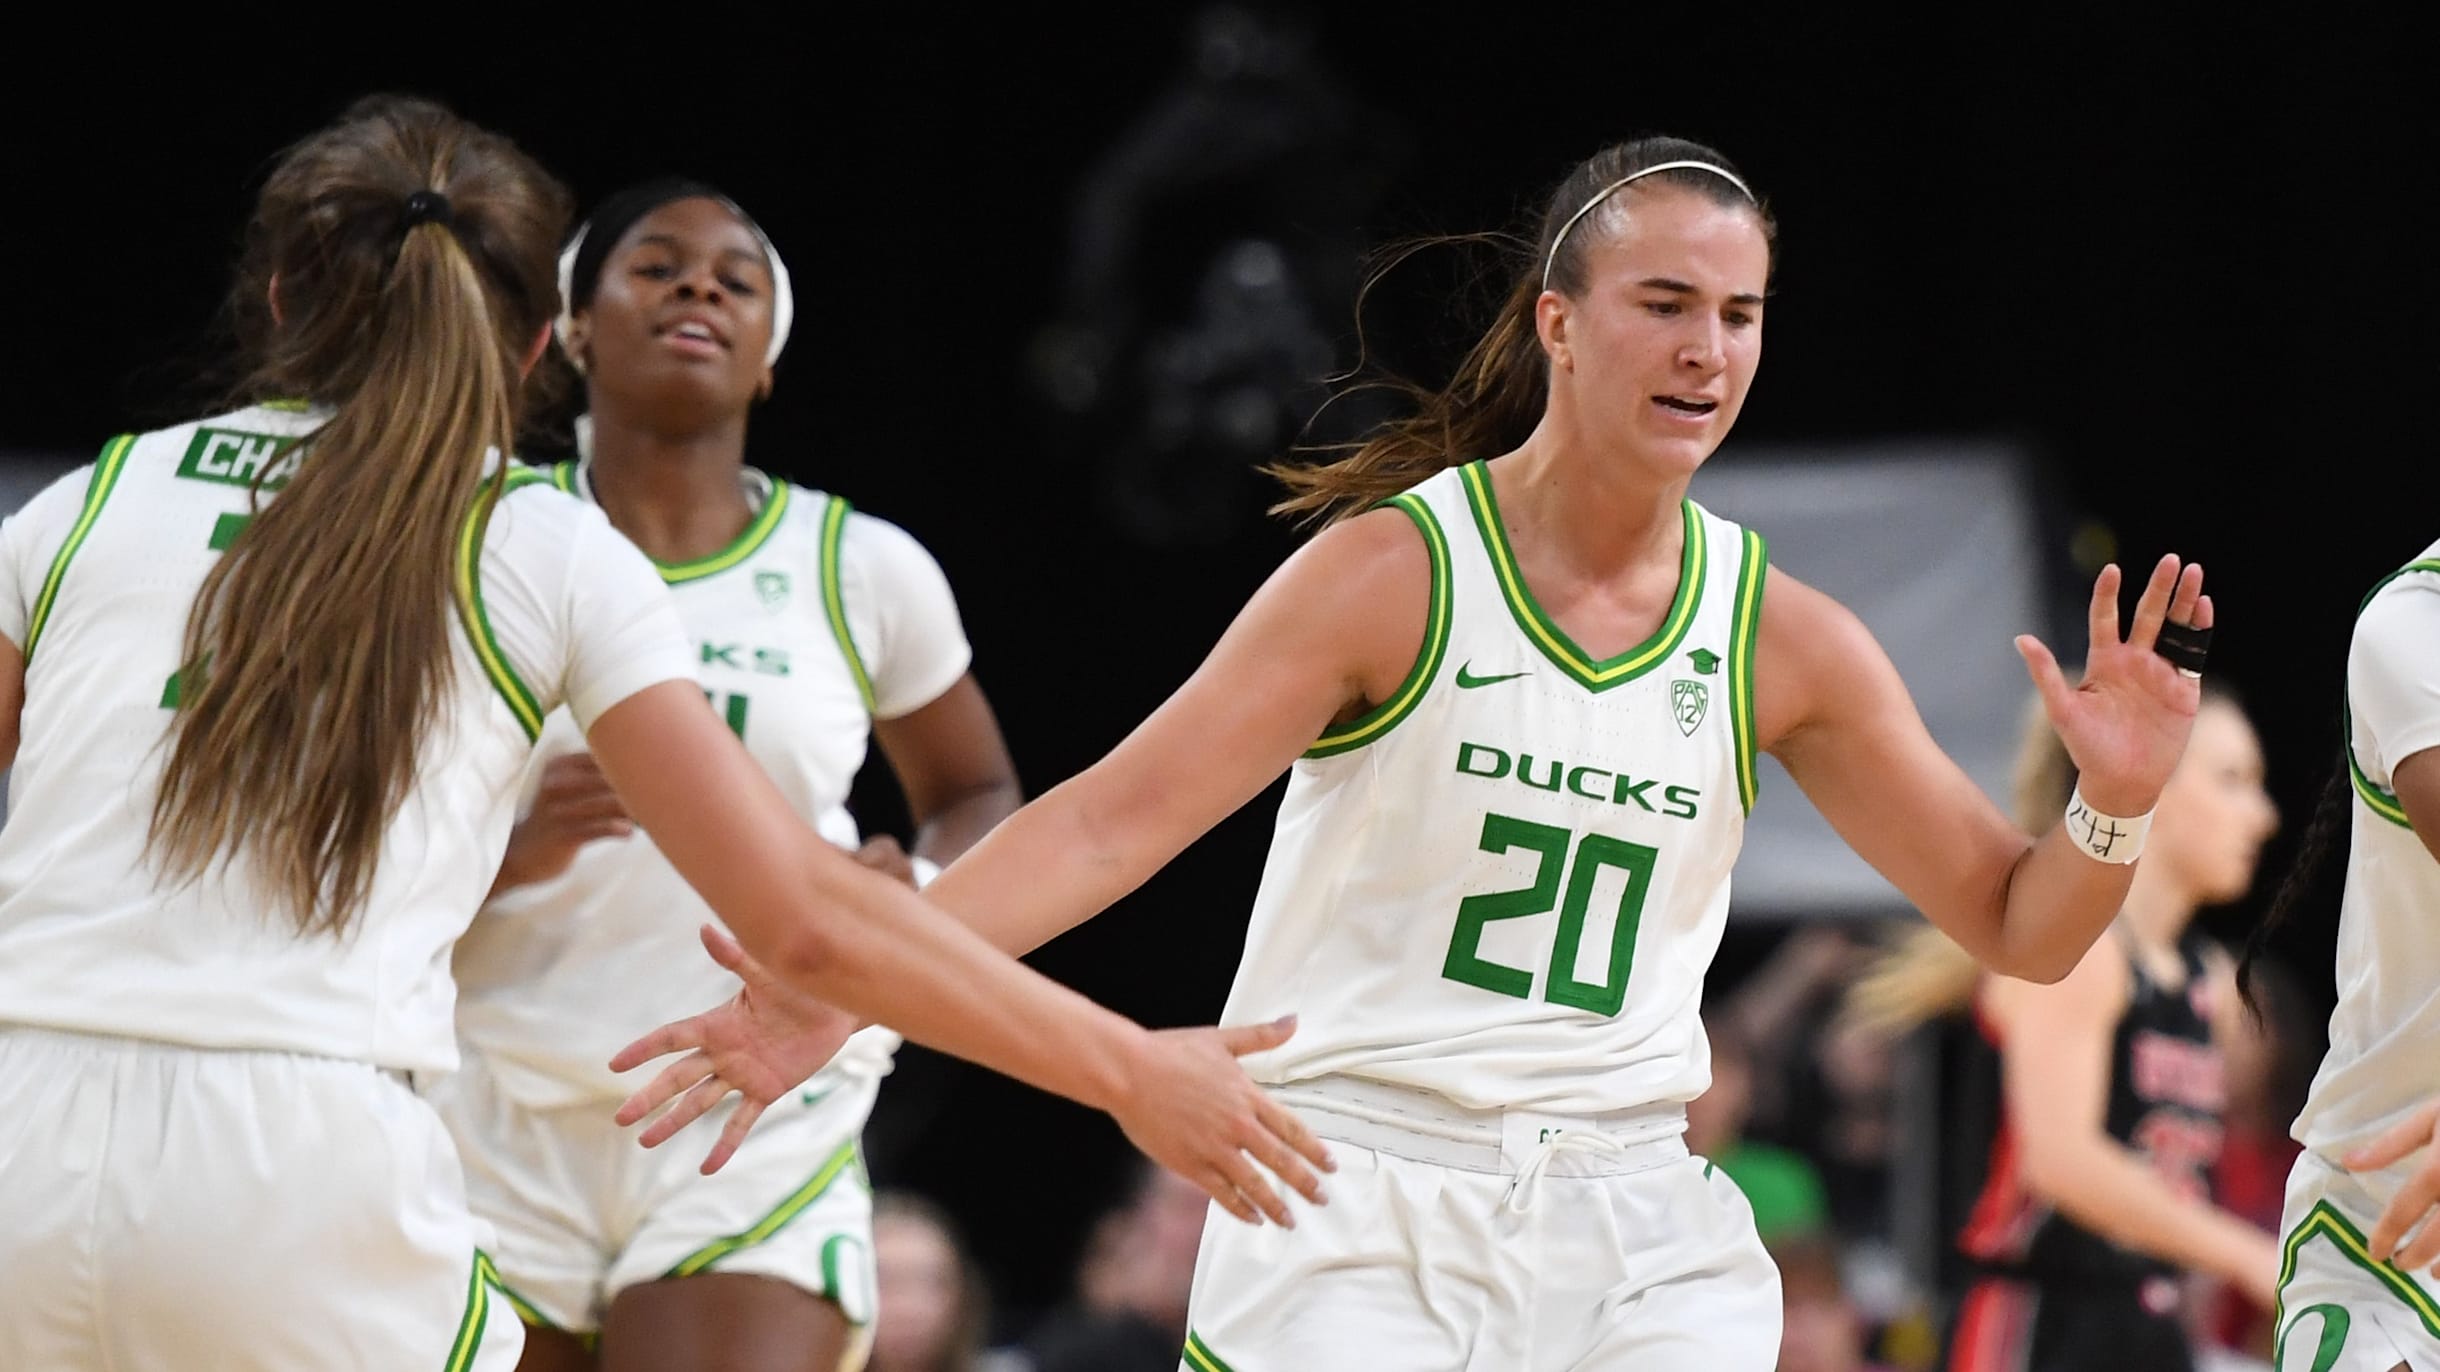 New York Liberty news: Sabrina Ionescu 'excited' for potential opportunity